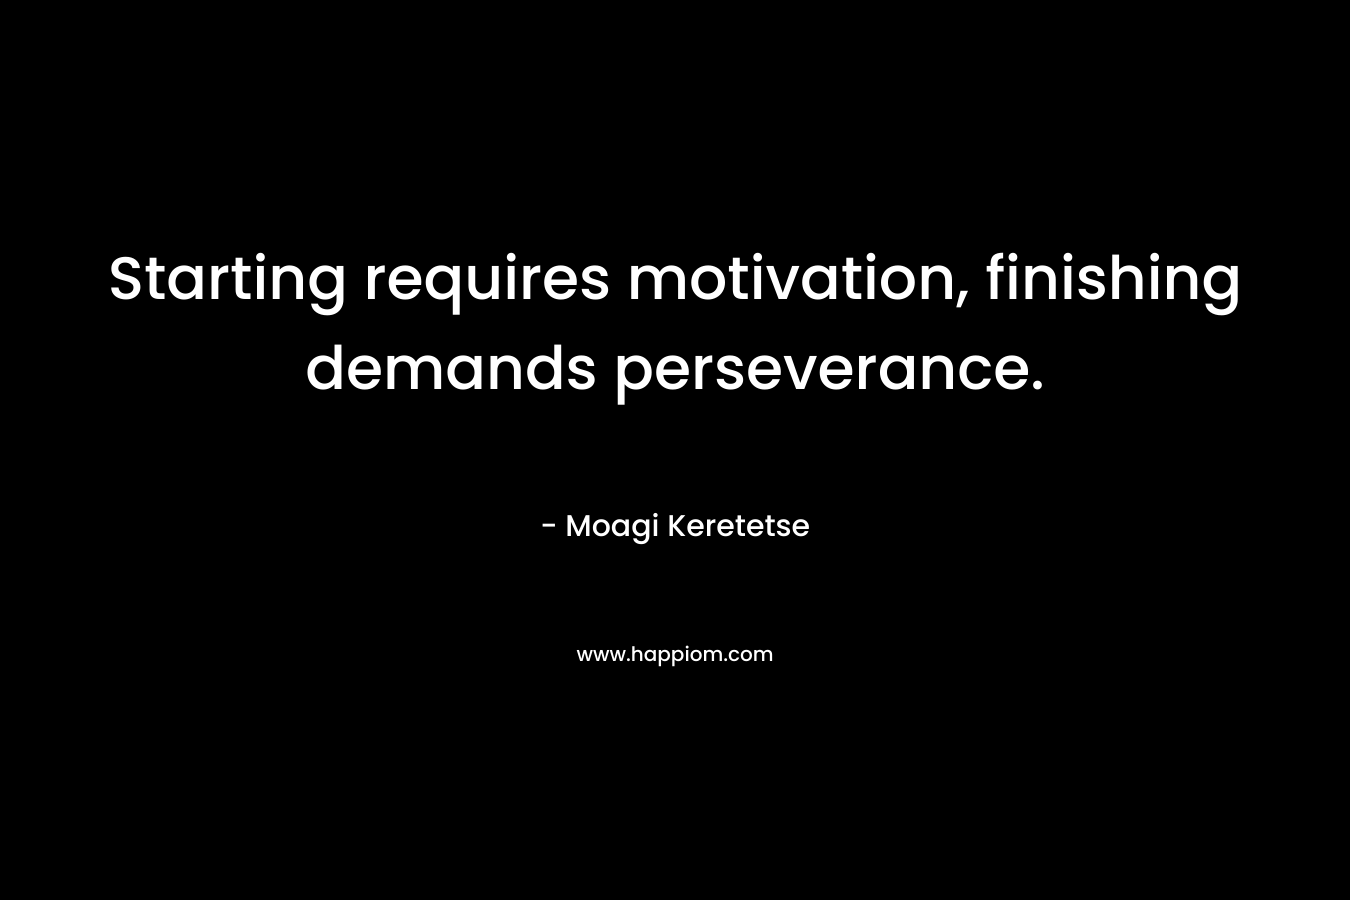 Starting requires motivation, finishing demands perseverance.